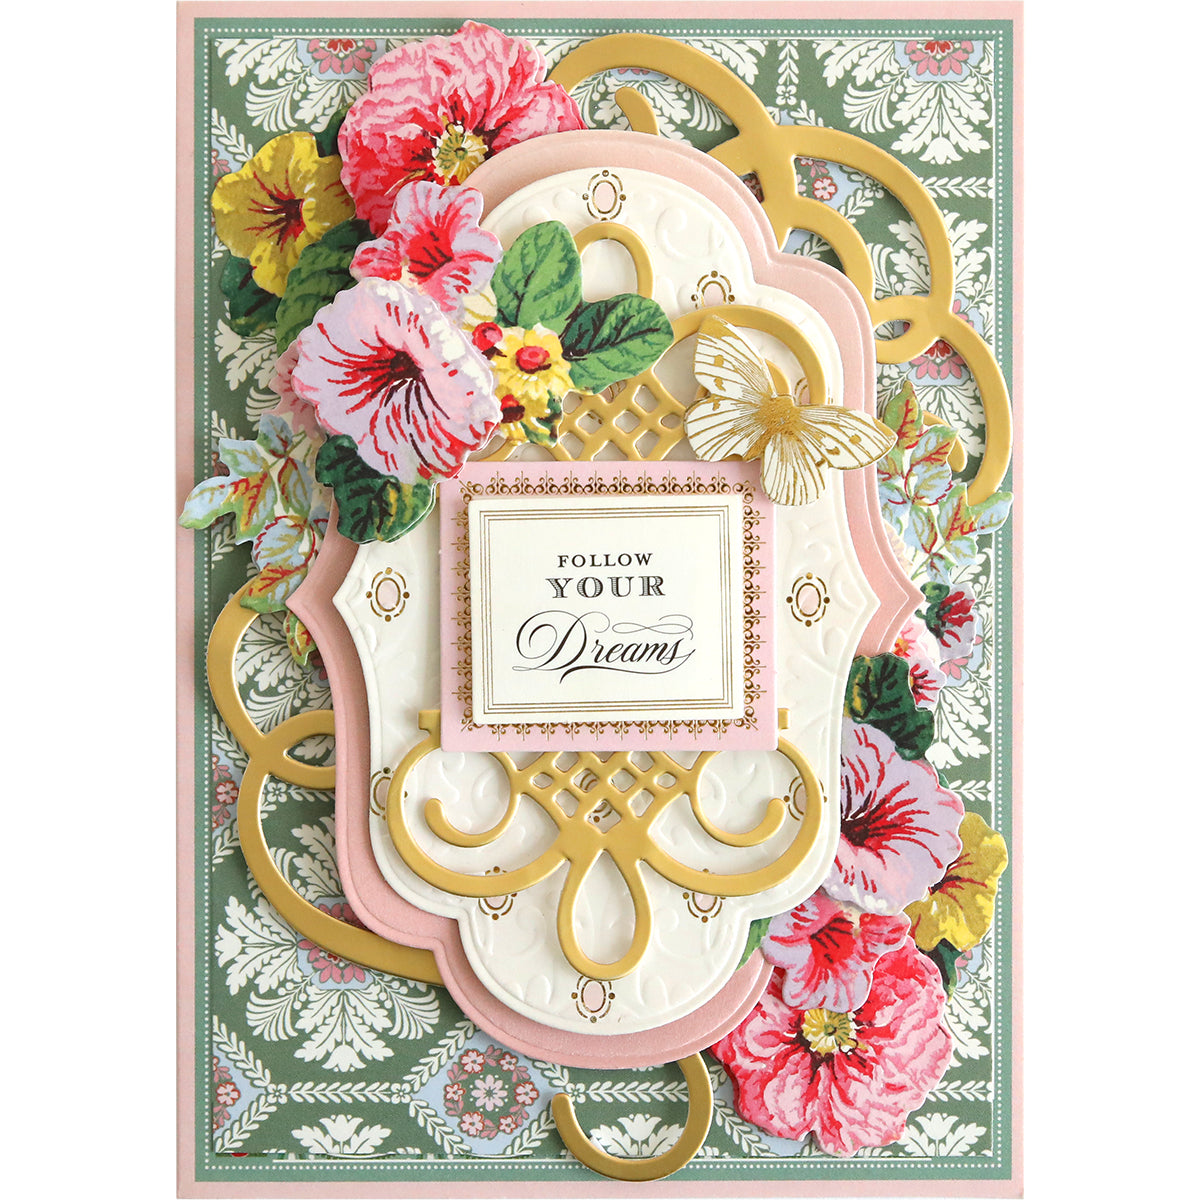 A Flourish Die Bundle adorned with pink flowers and a decorative gold frame, perfect for cardmaking projects.